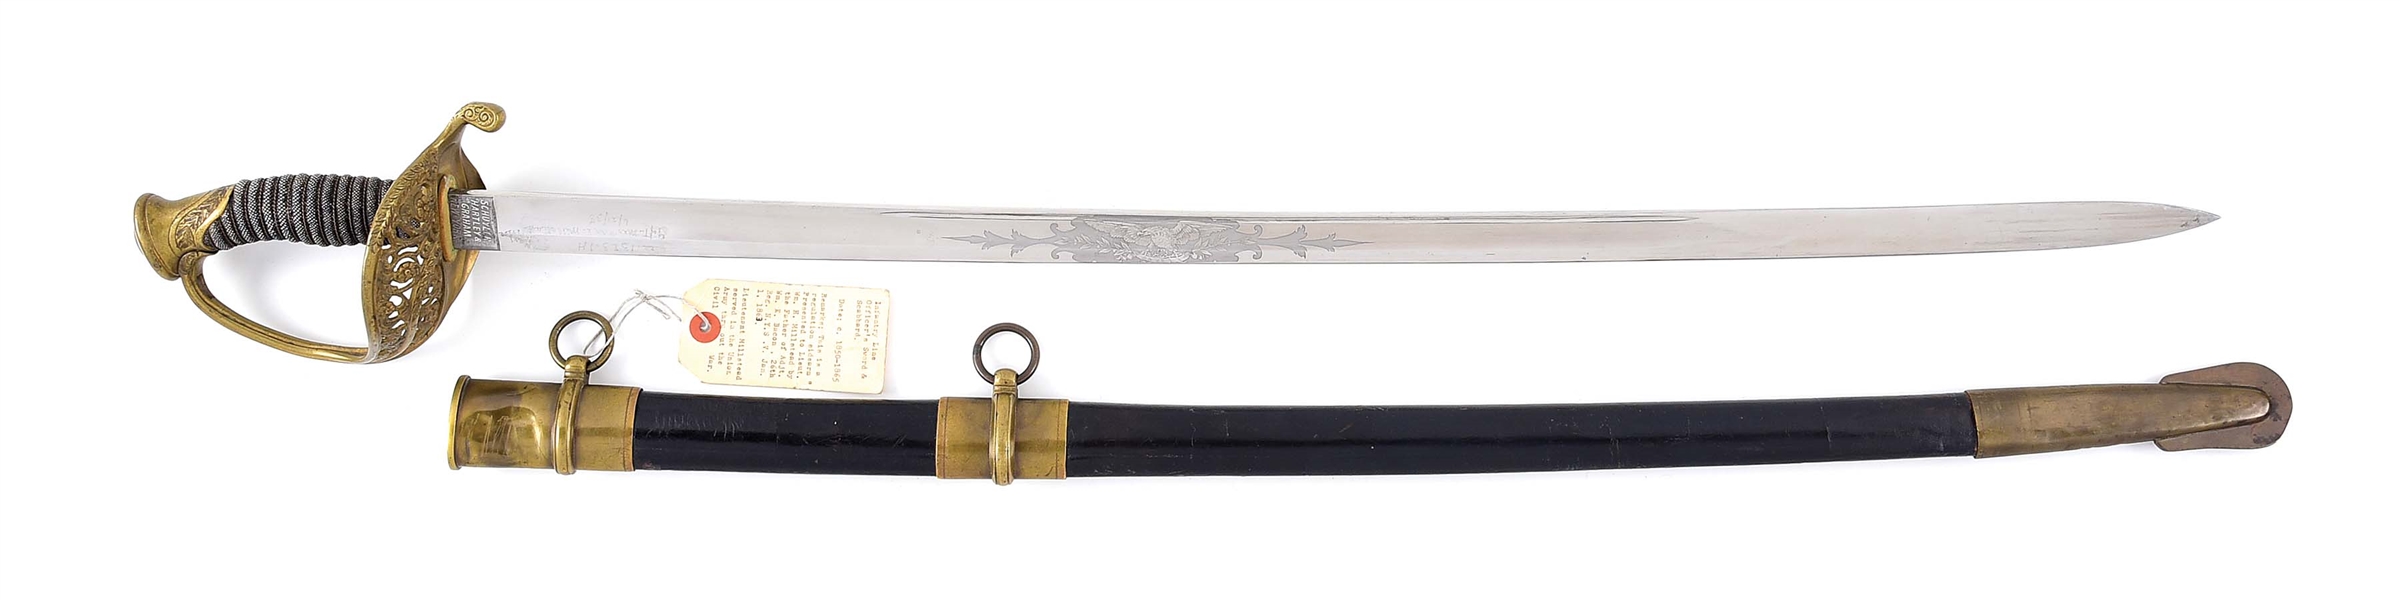 TOUCHING CIVIL WAR PRESENTATION SWORD OF LT. WILLIAM H. MILLSTEAD, 26TH NEW YORK STATE VOLUNTEERS, PRESENT AT LINCOLNS ASSASSINATION.